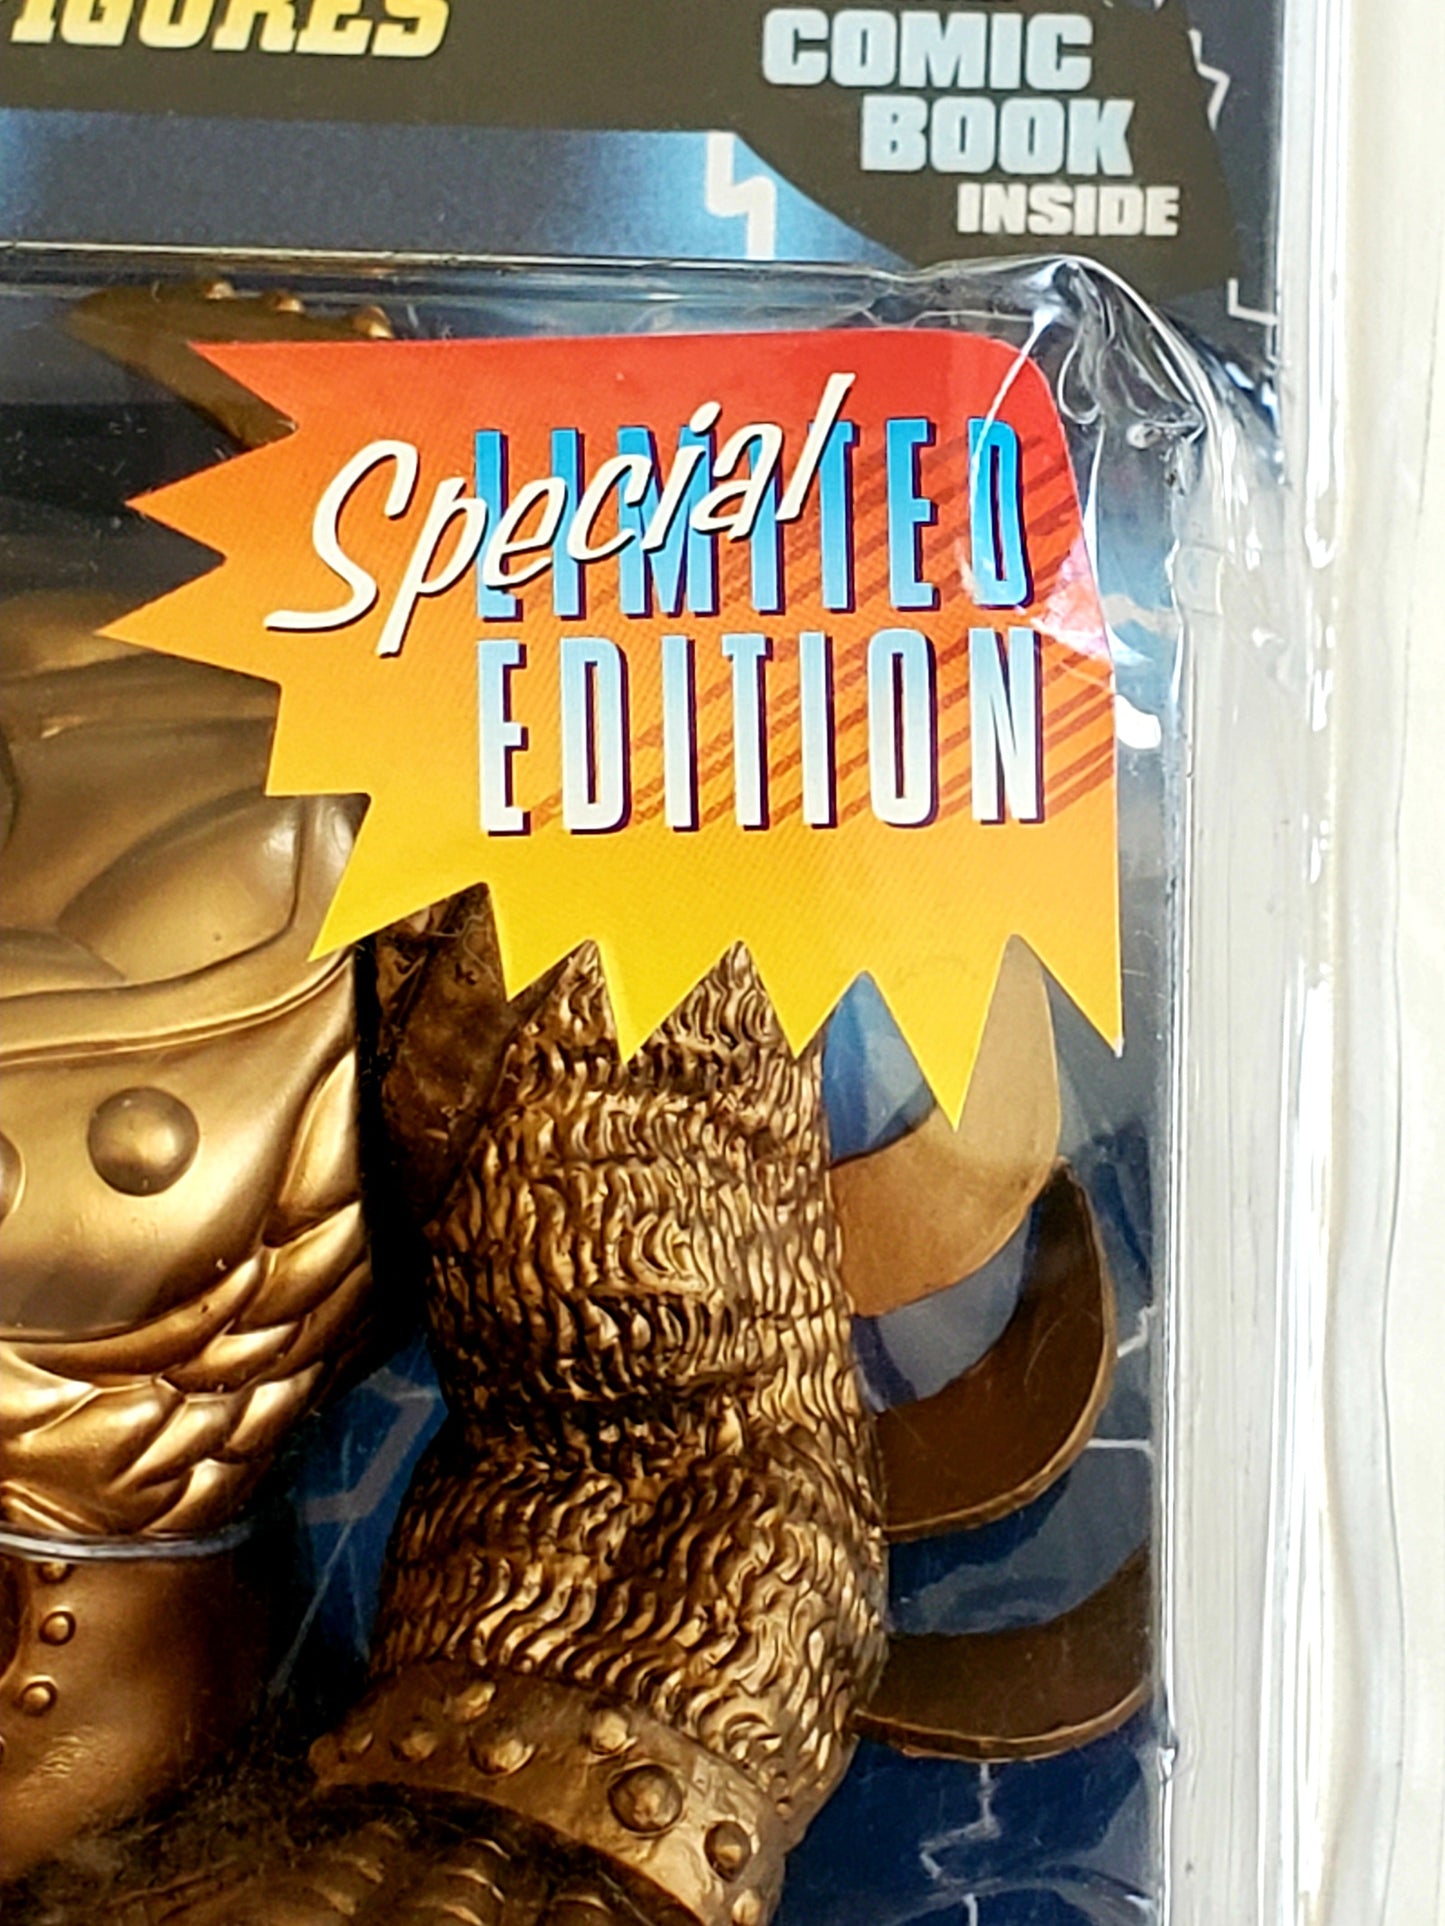 Special Edition Gold Overtkill Action Figure from Todd McFarlane's Spawn